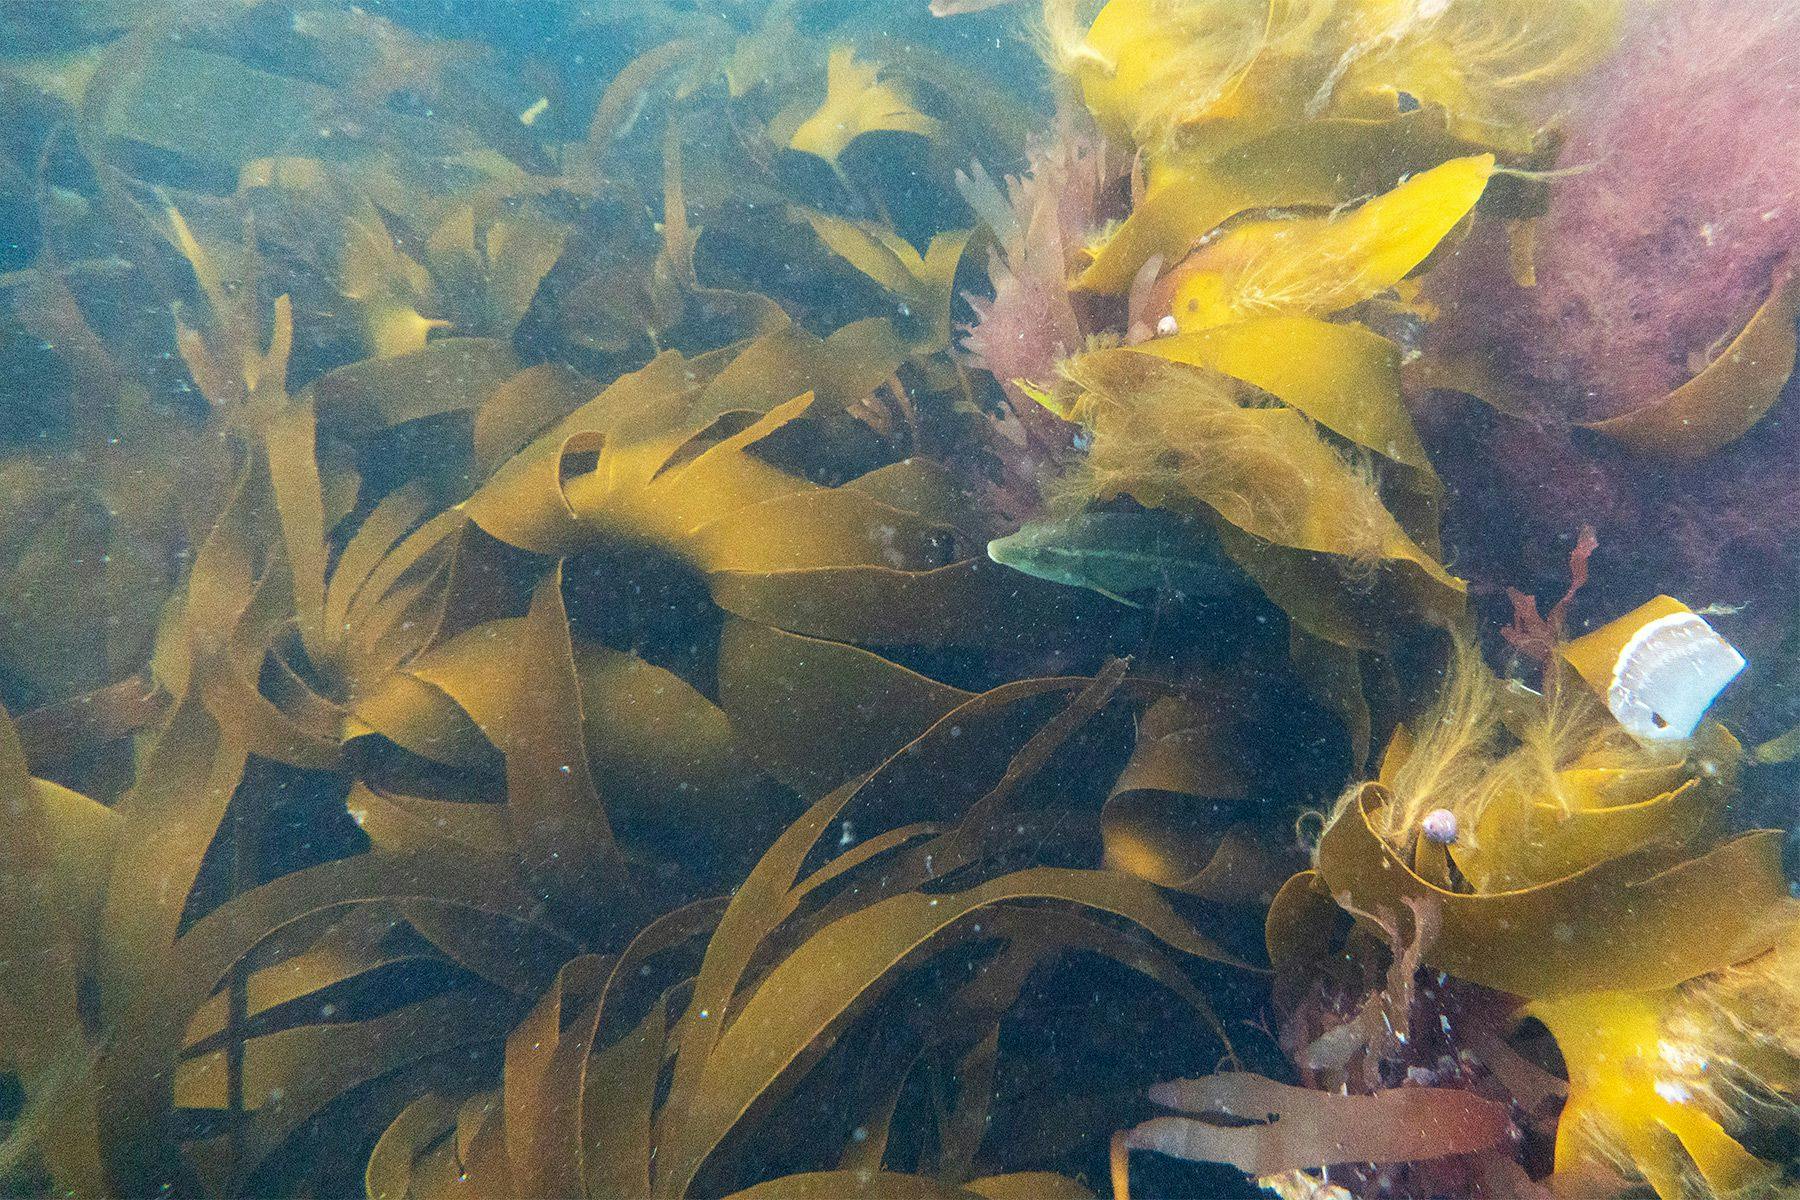 temperate underwater rocky ecosystem with lots of seaweed and a fish